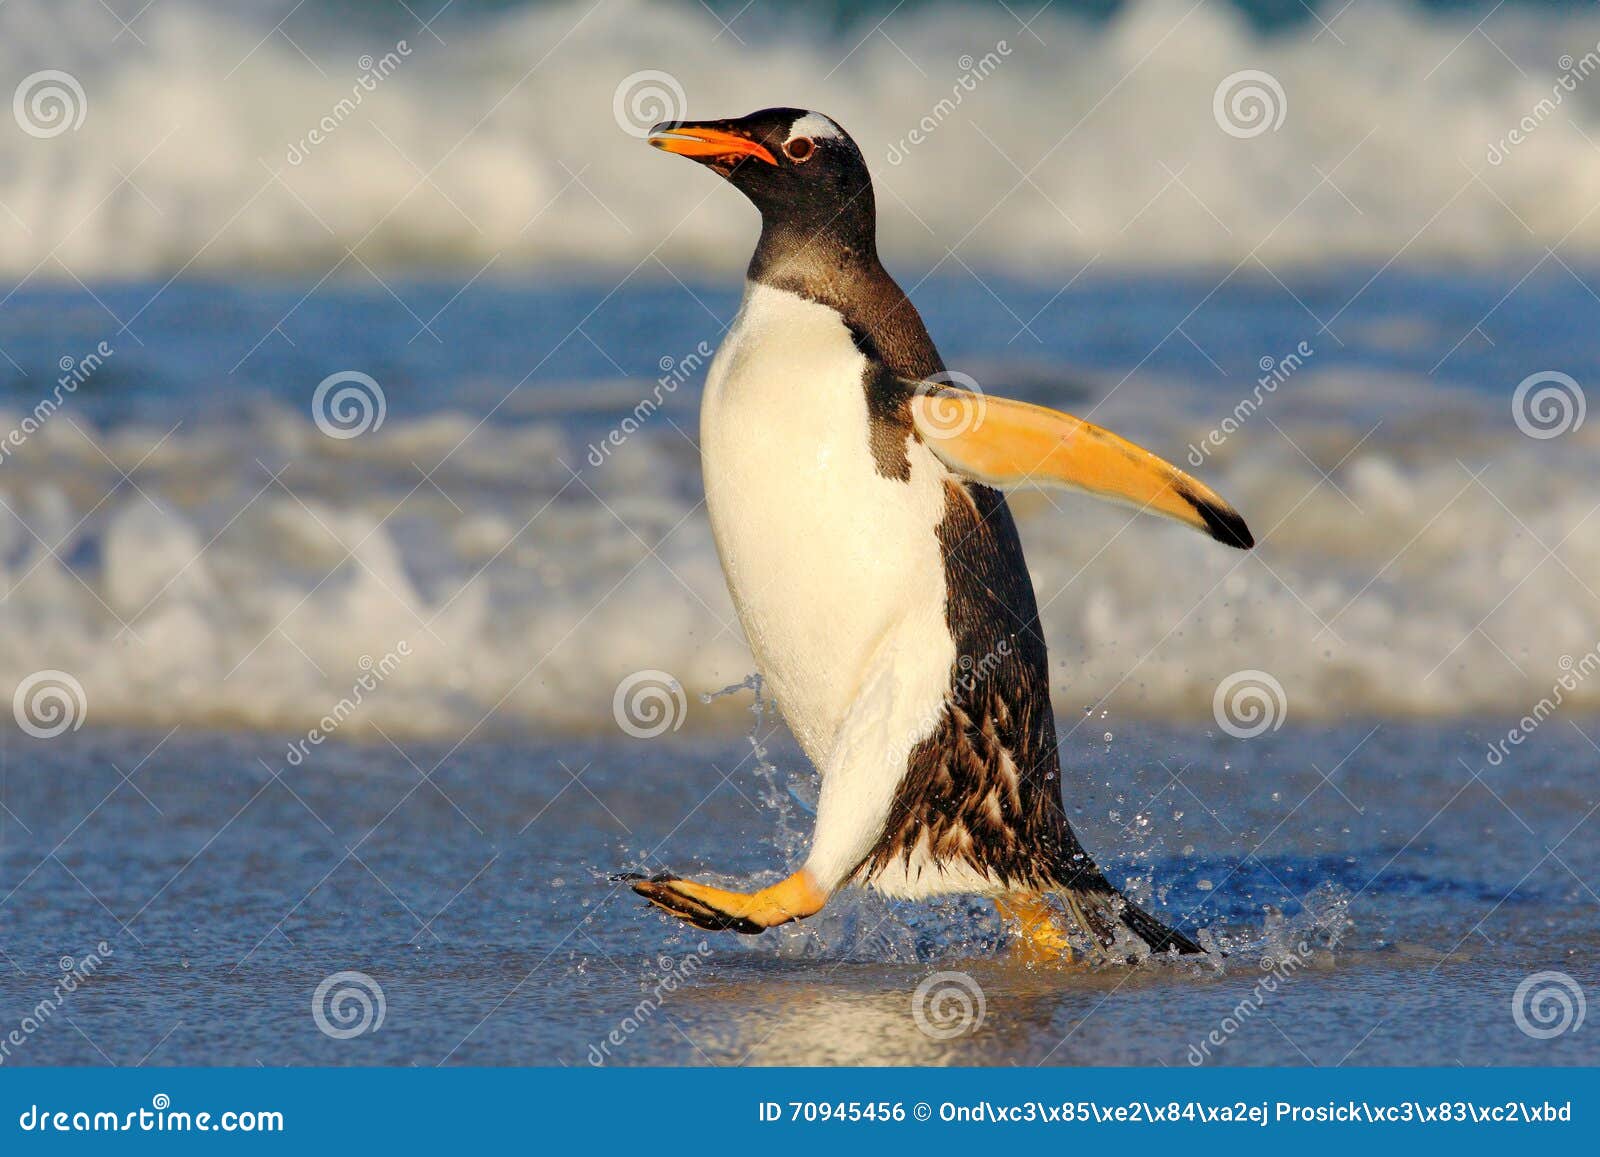 penguin in the blue waves. gentoo penguin, water bird jumps out of the blue water while swimming through the ocean in falkland isl